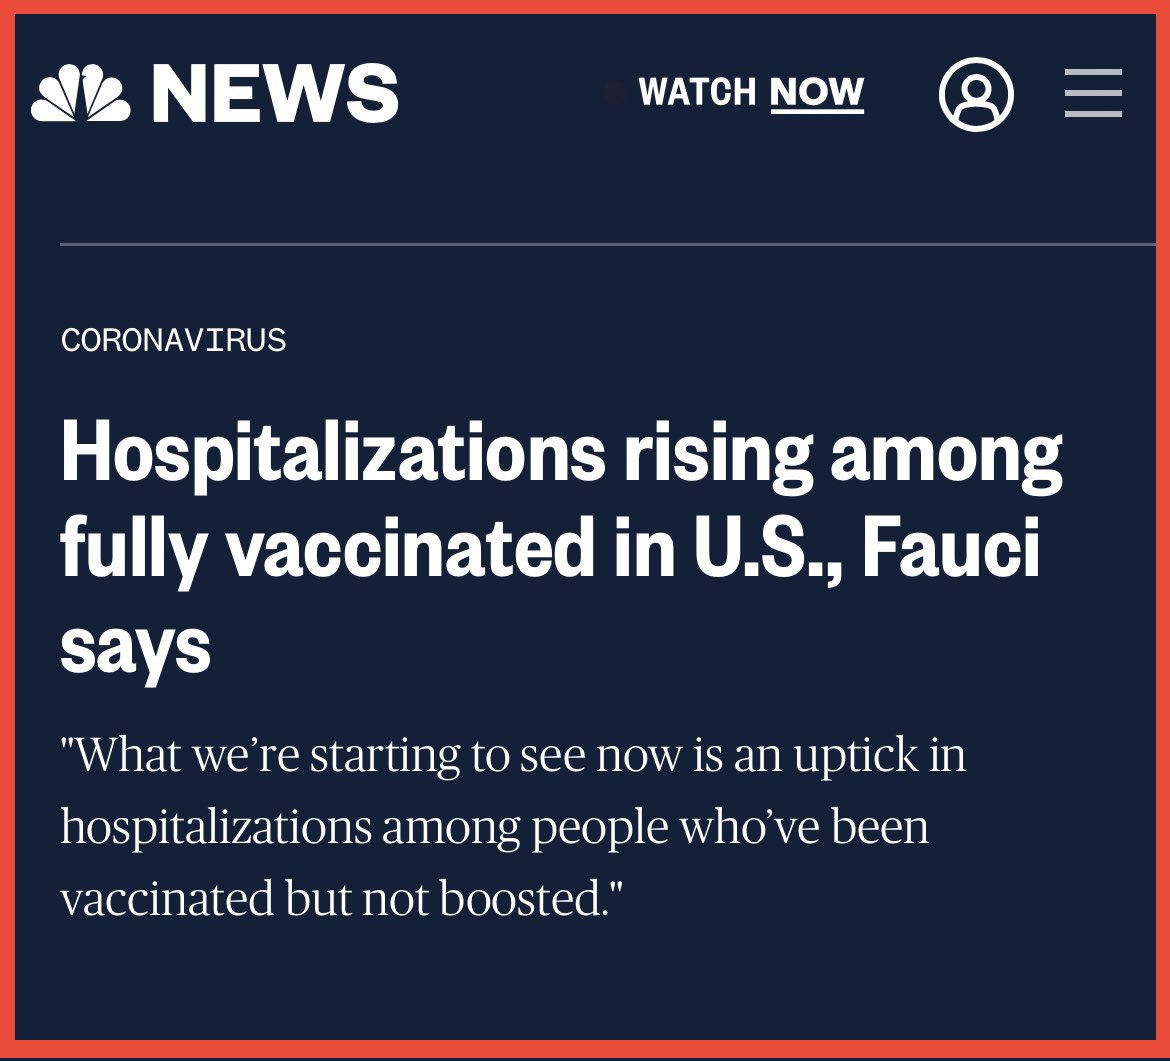 More fully vaccinated people are being hospitalized with COVID-19 as vaccine immunity has waned, Dr. Anthony Fauci